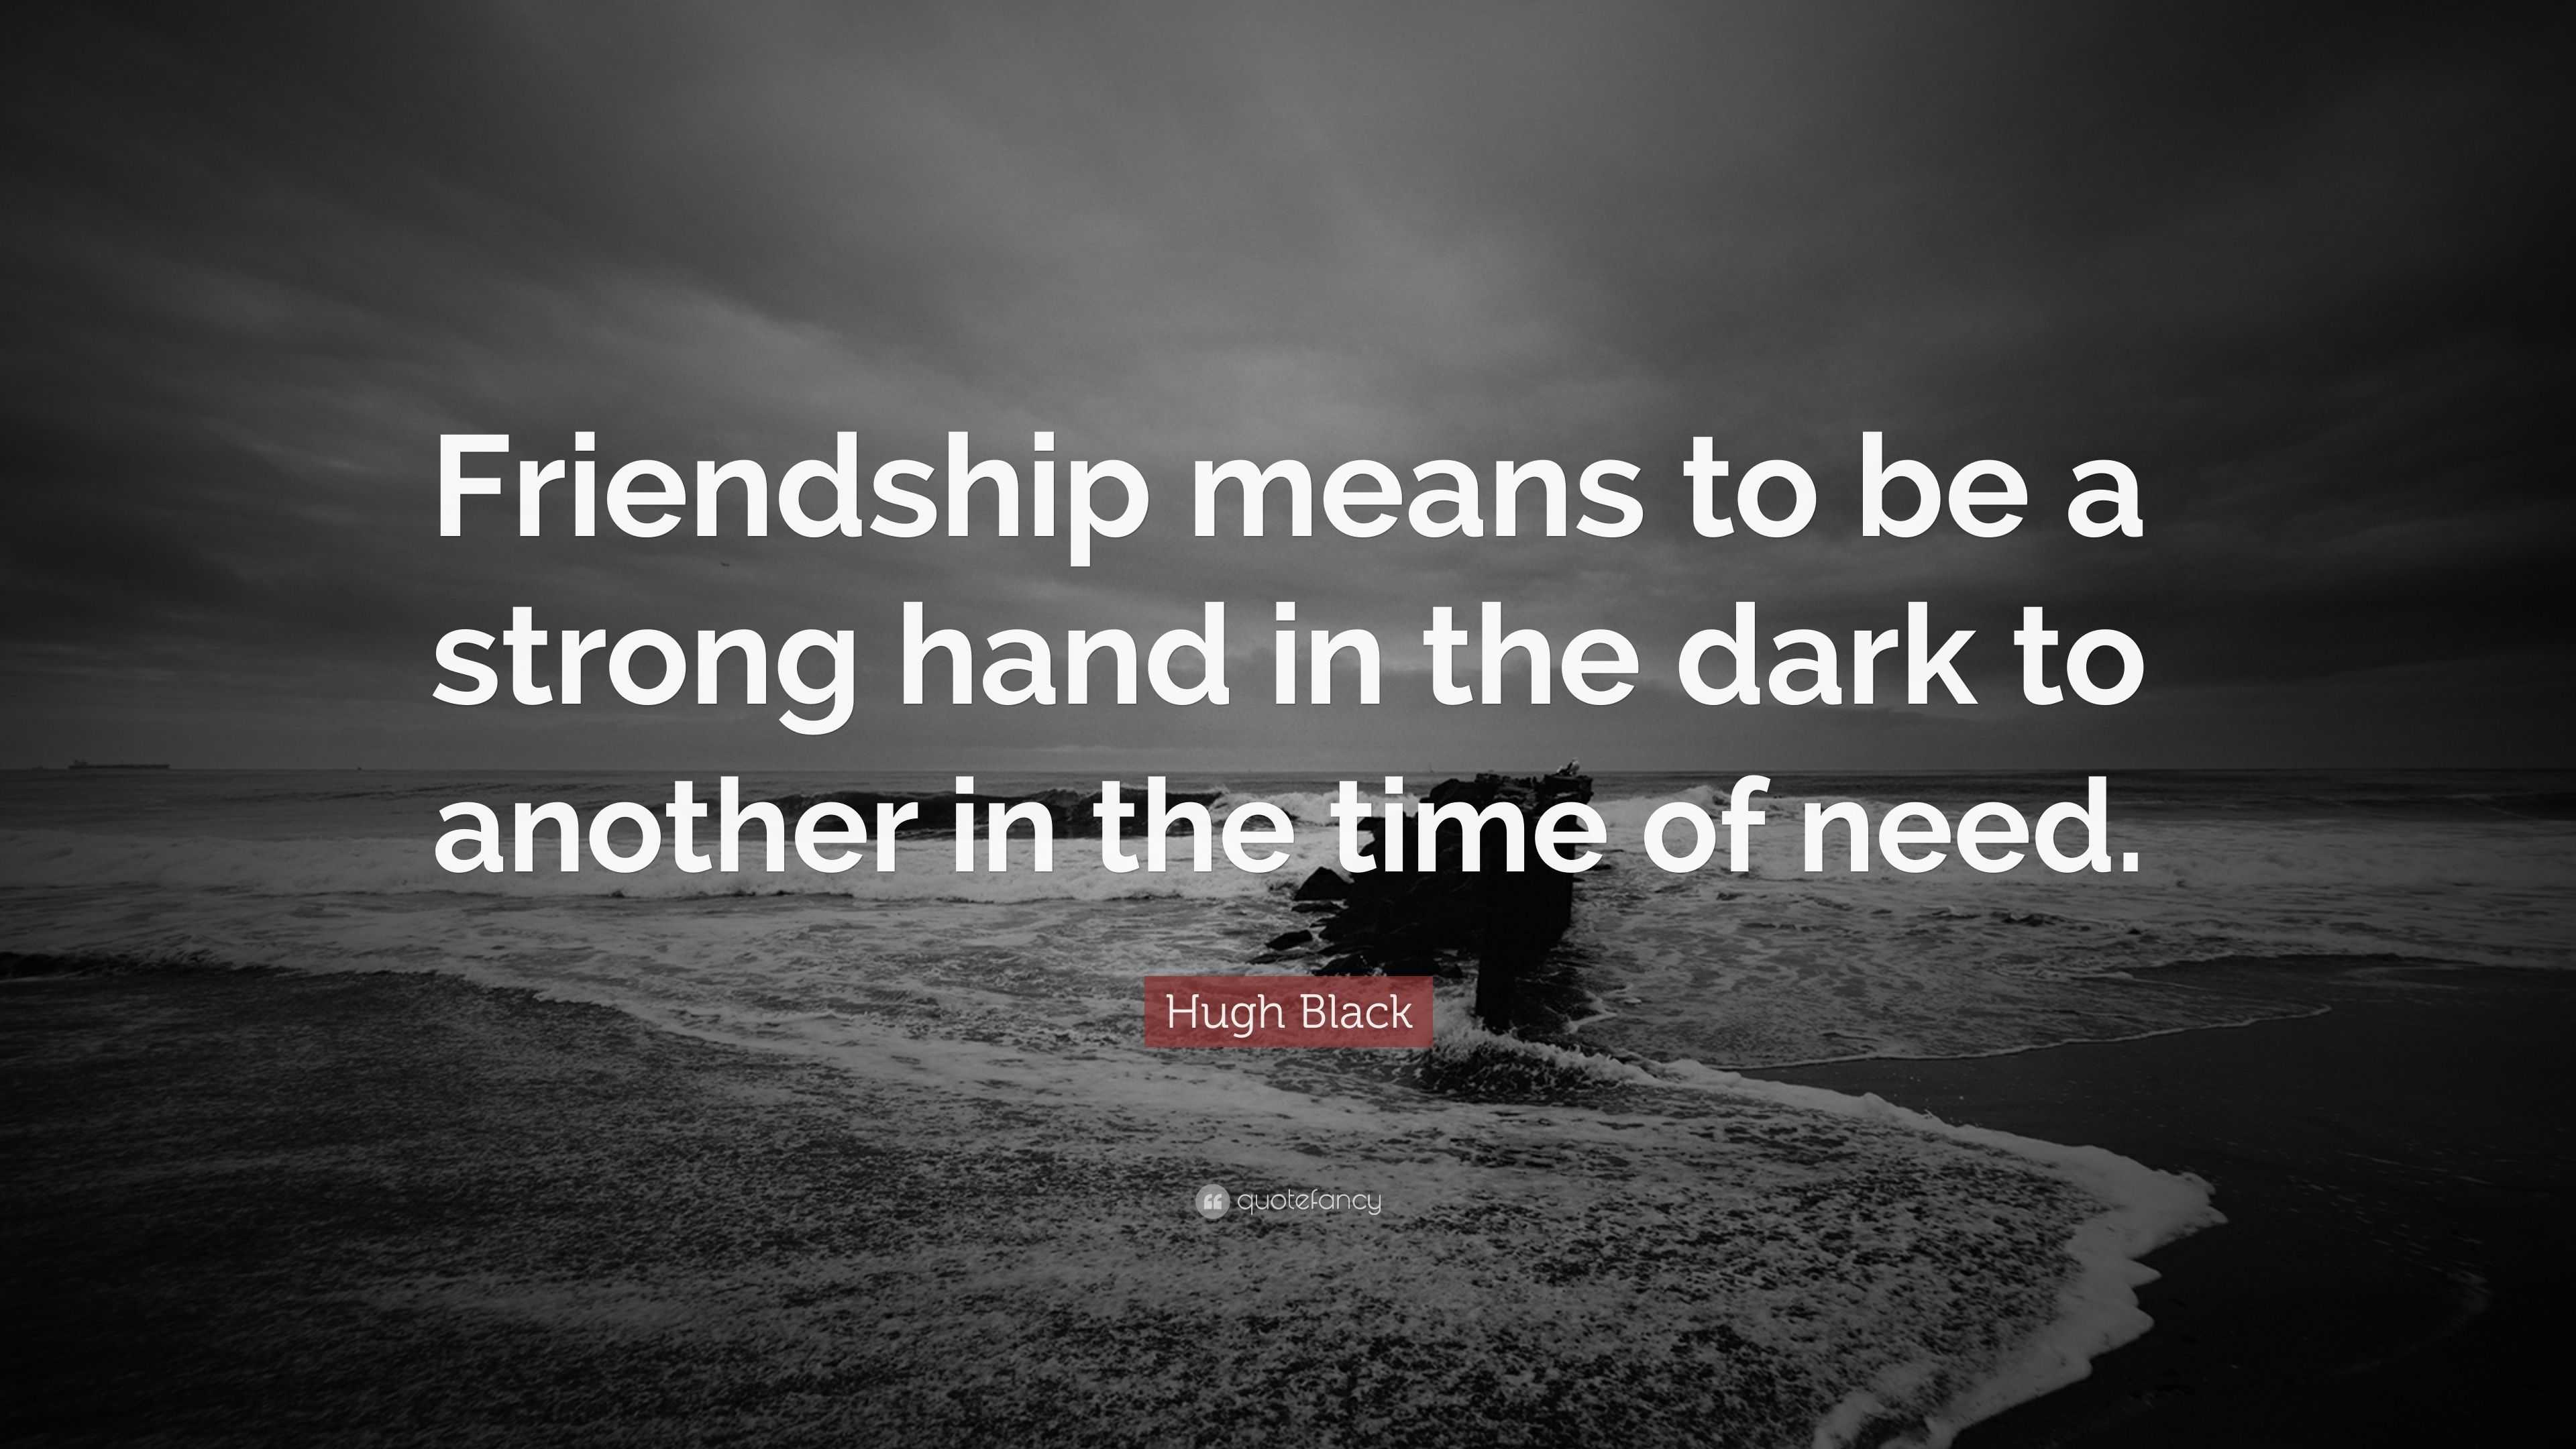 Hugh Black Quote: “Friendship means to be a strong hand in the dark to ...